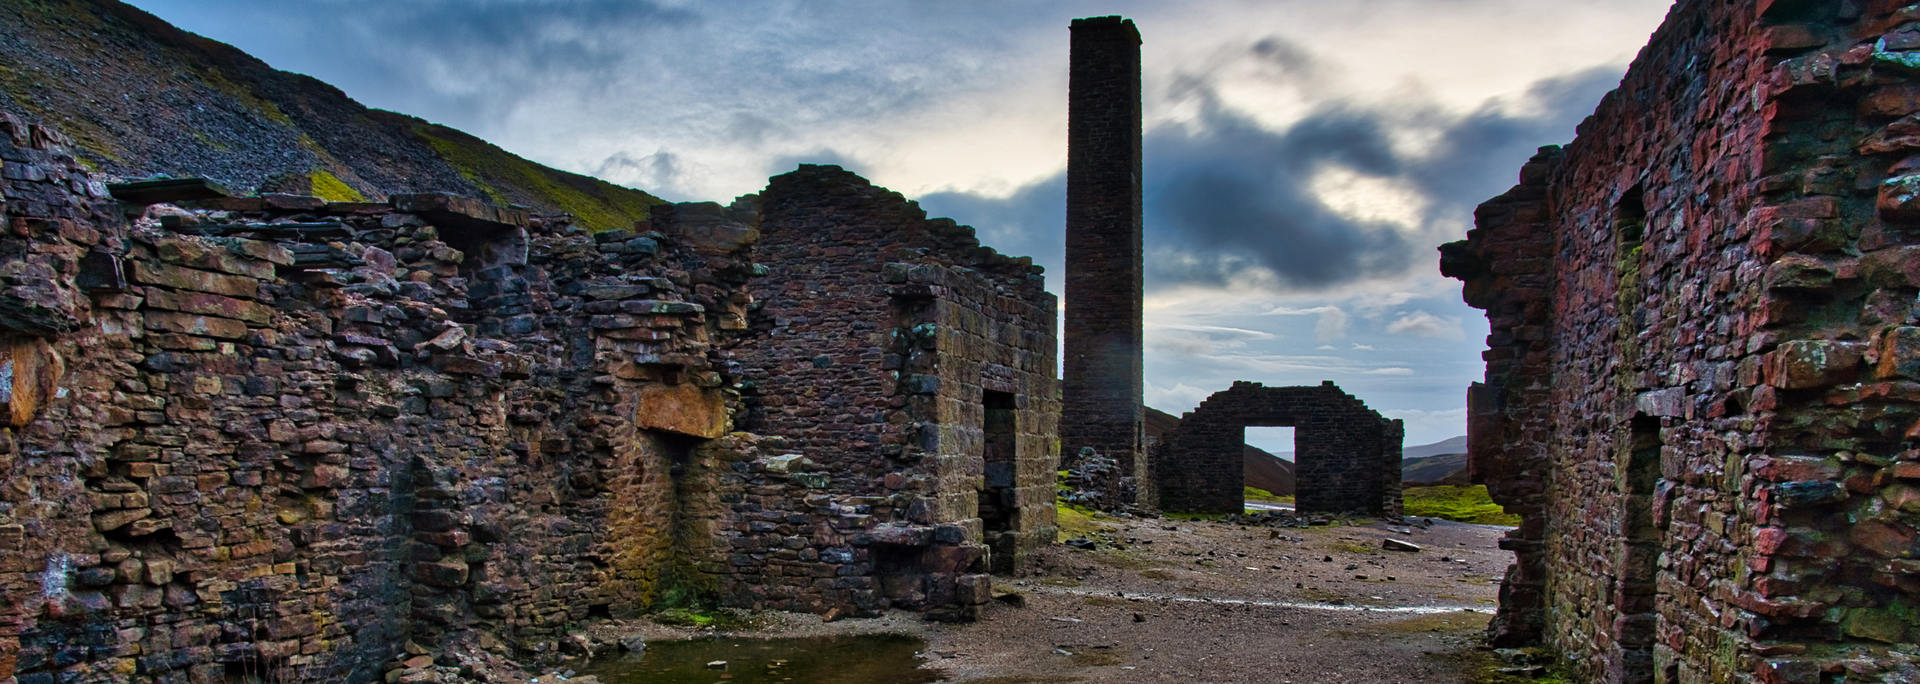 Picture of the Old Gang mine ruins in the Yorkshire Dales
